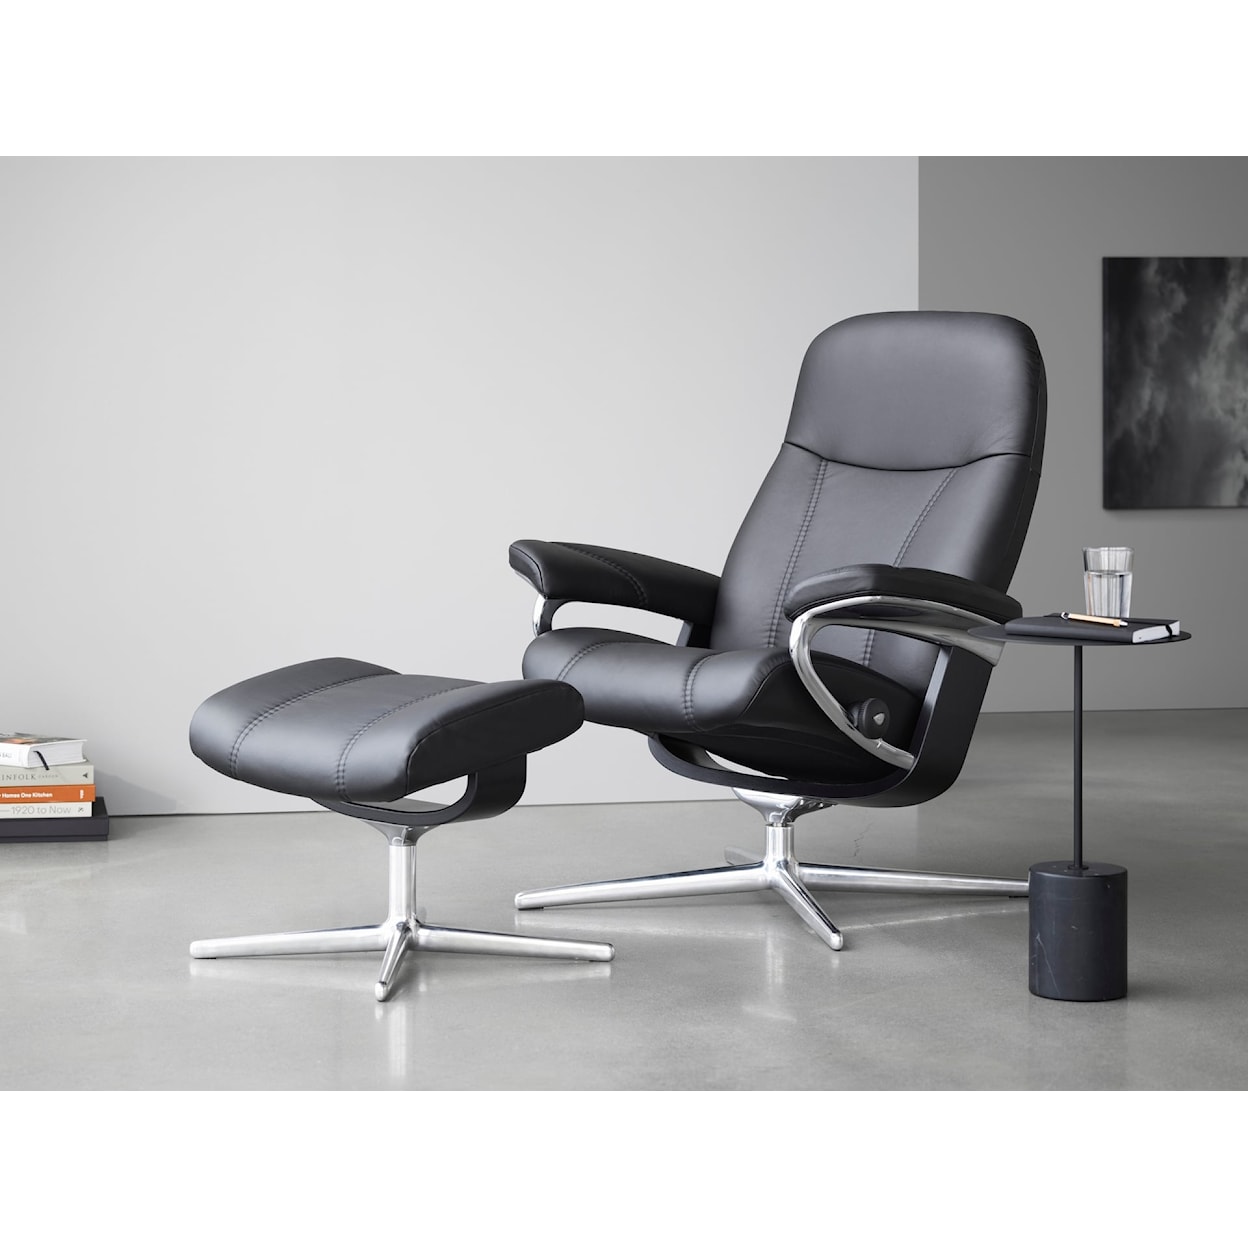 Stressless by Ekornes Consul Consul Large Recliner and Ottoman